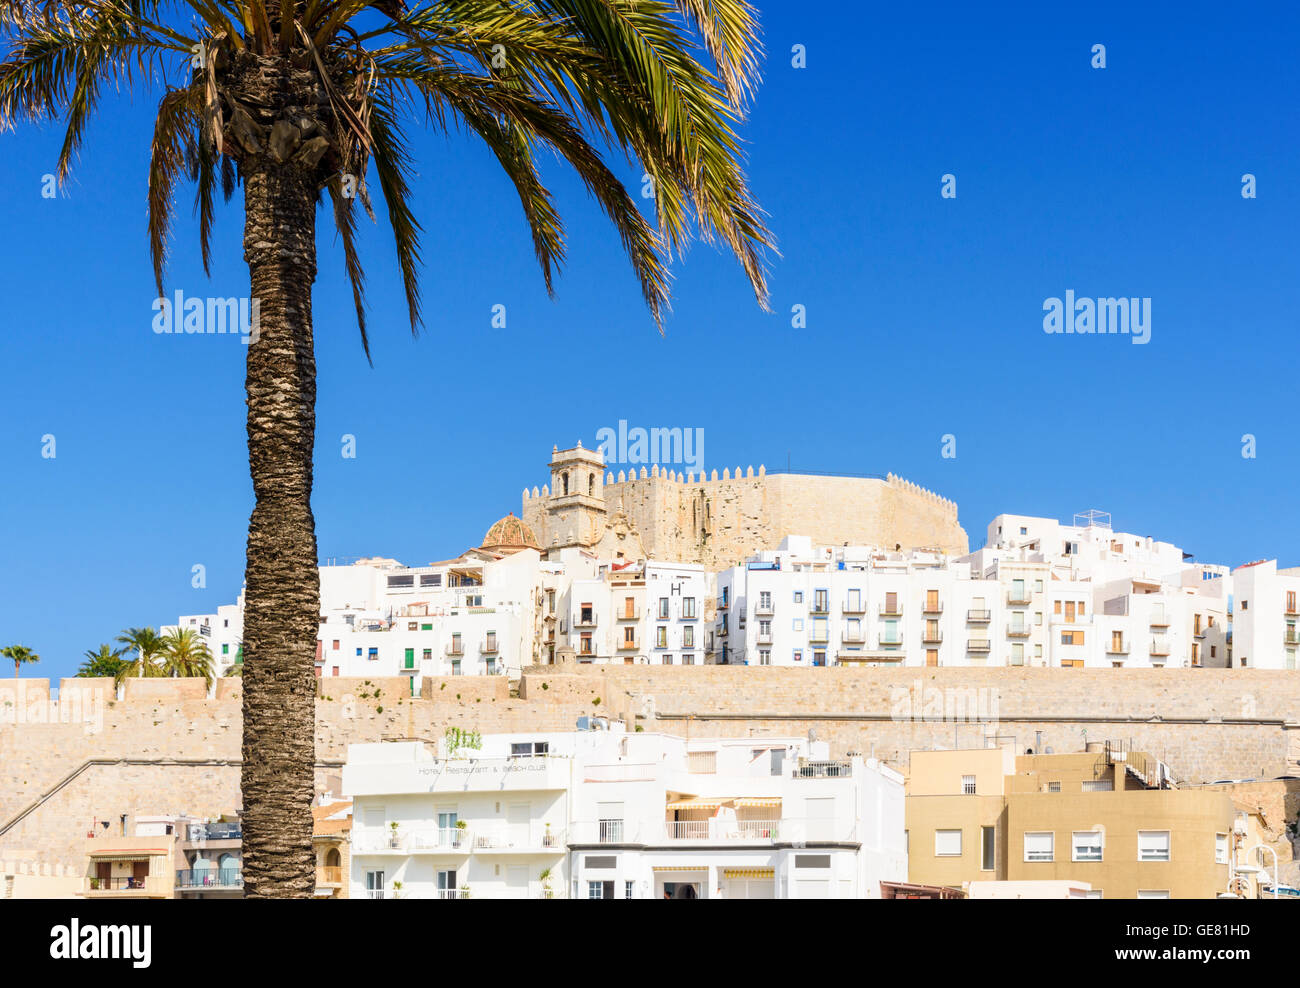 Palm tree framed Papa Luna Castle and old town atop the rocky headland on the Costa del Azahar, Peniscola, Spain Stock Photo